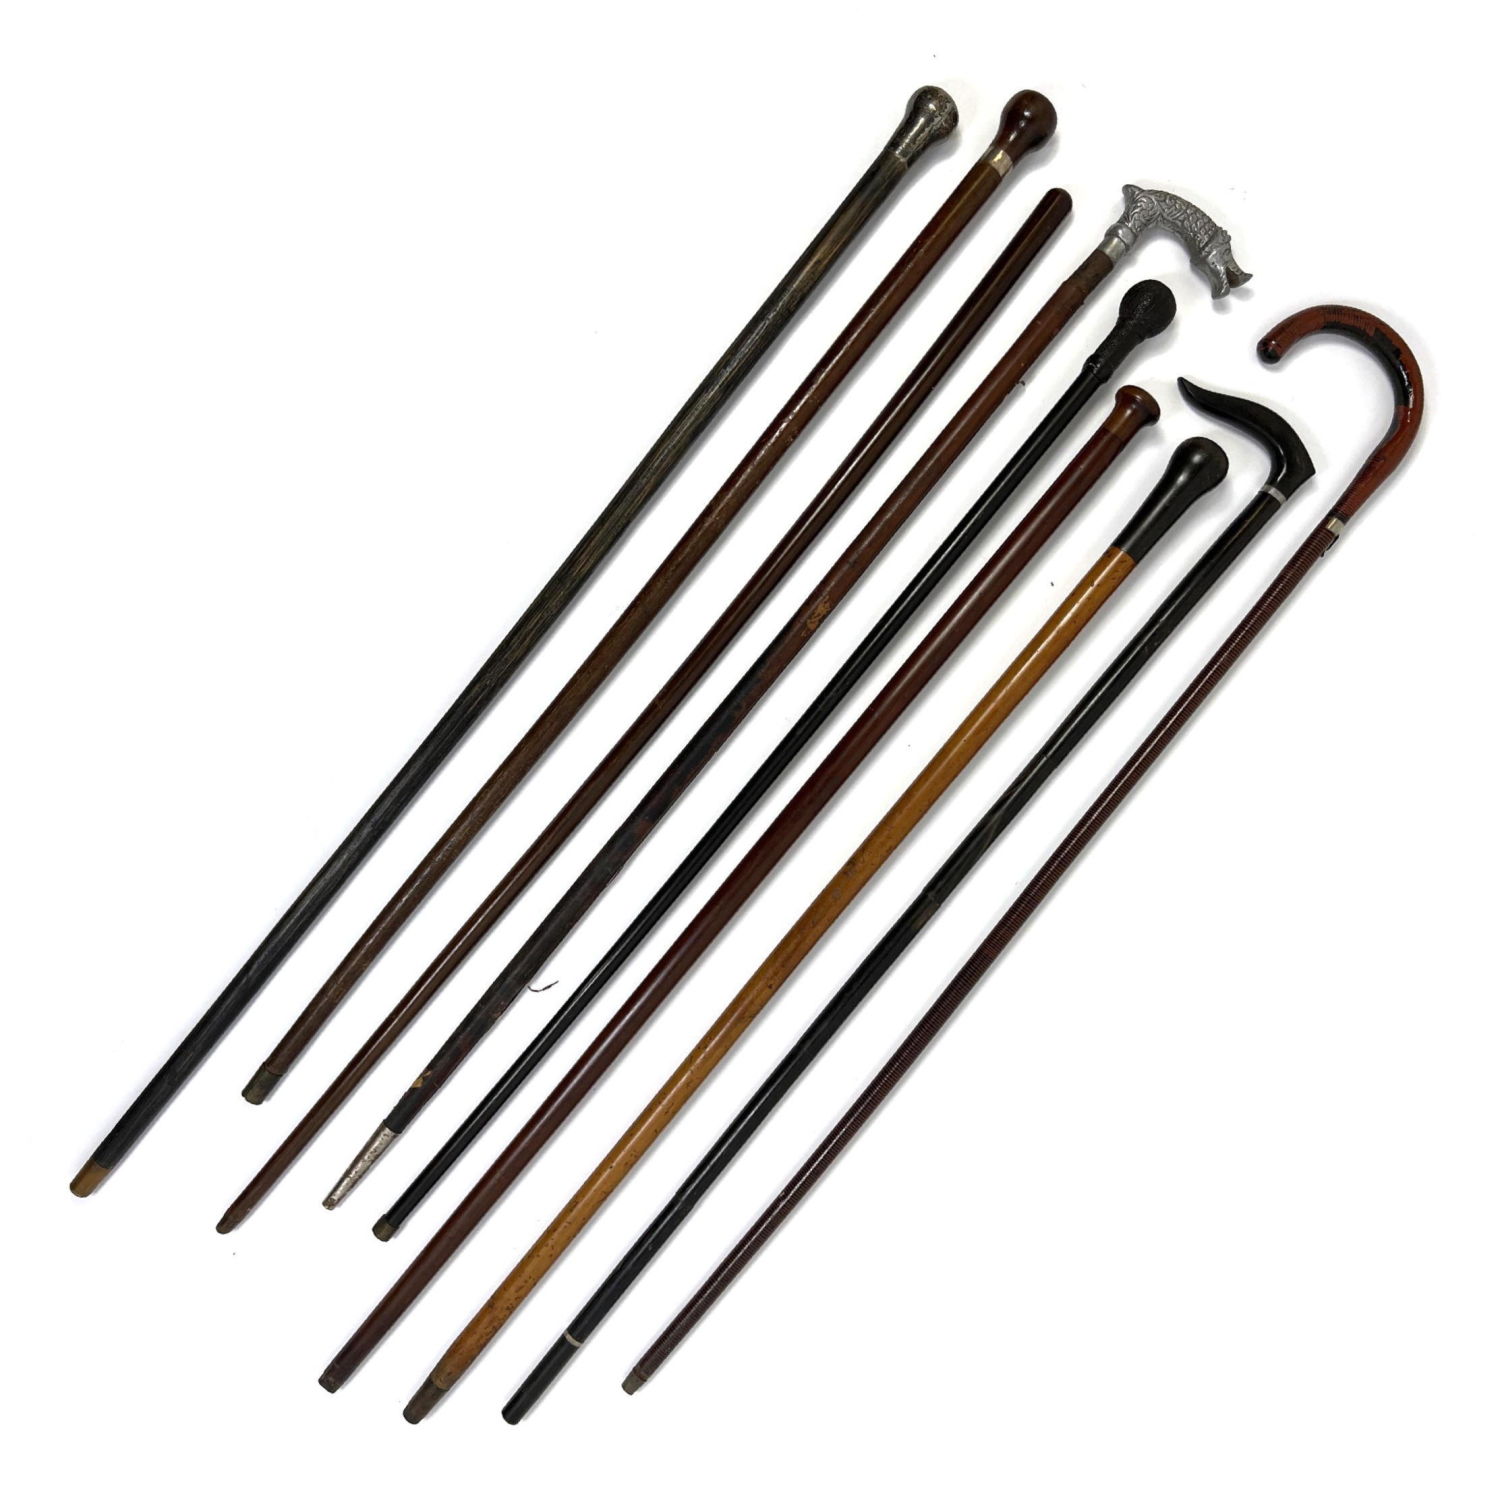 9pcs Vintage Canes and Walking 2a6313